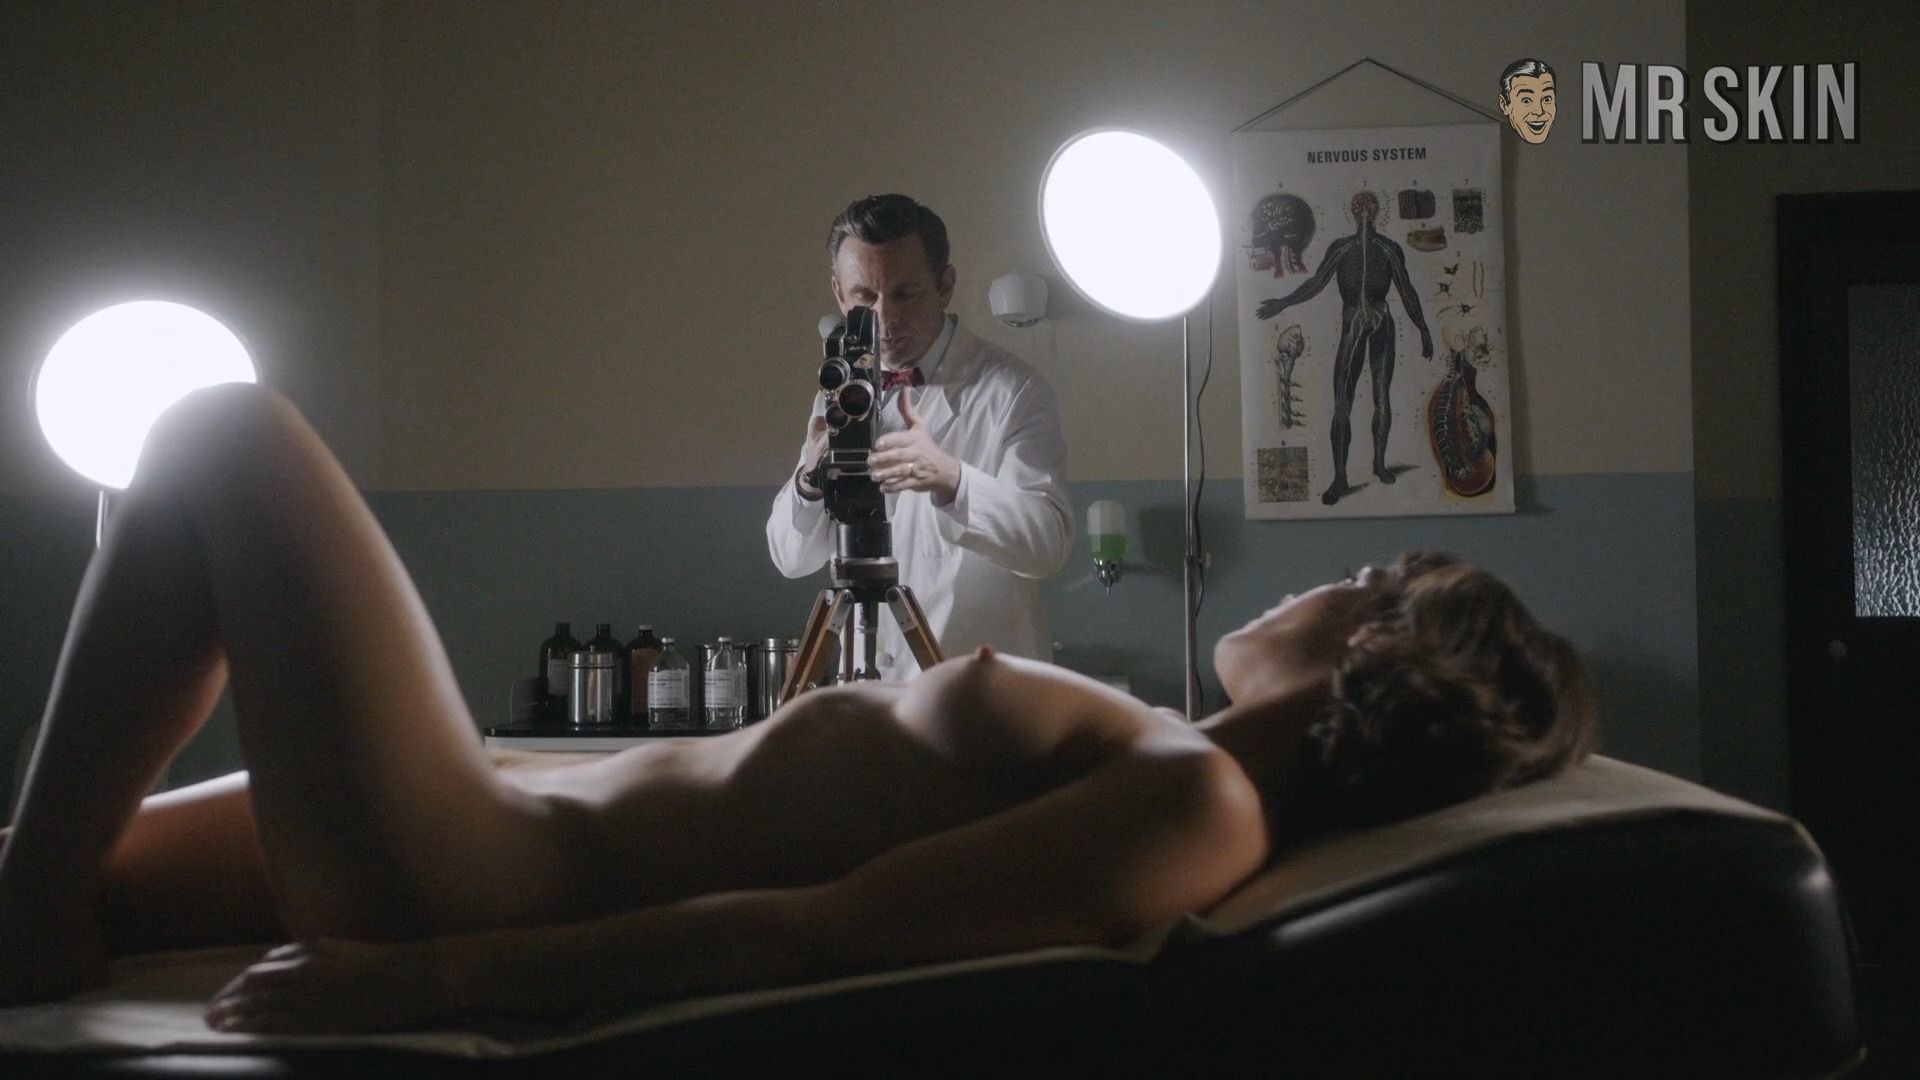 Lizzy Caplan Nude Naked Pics And Sex Scenes At Mr Skin